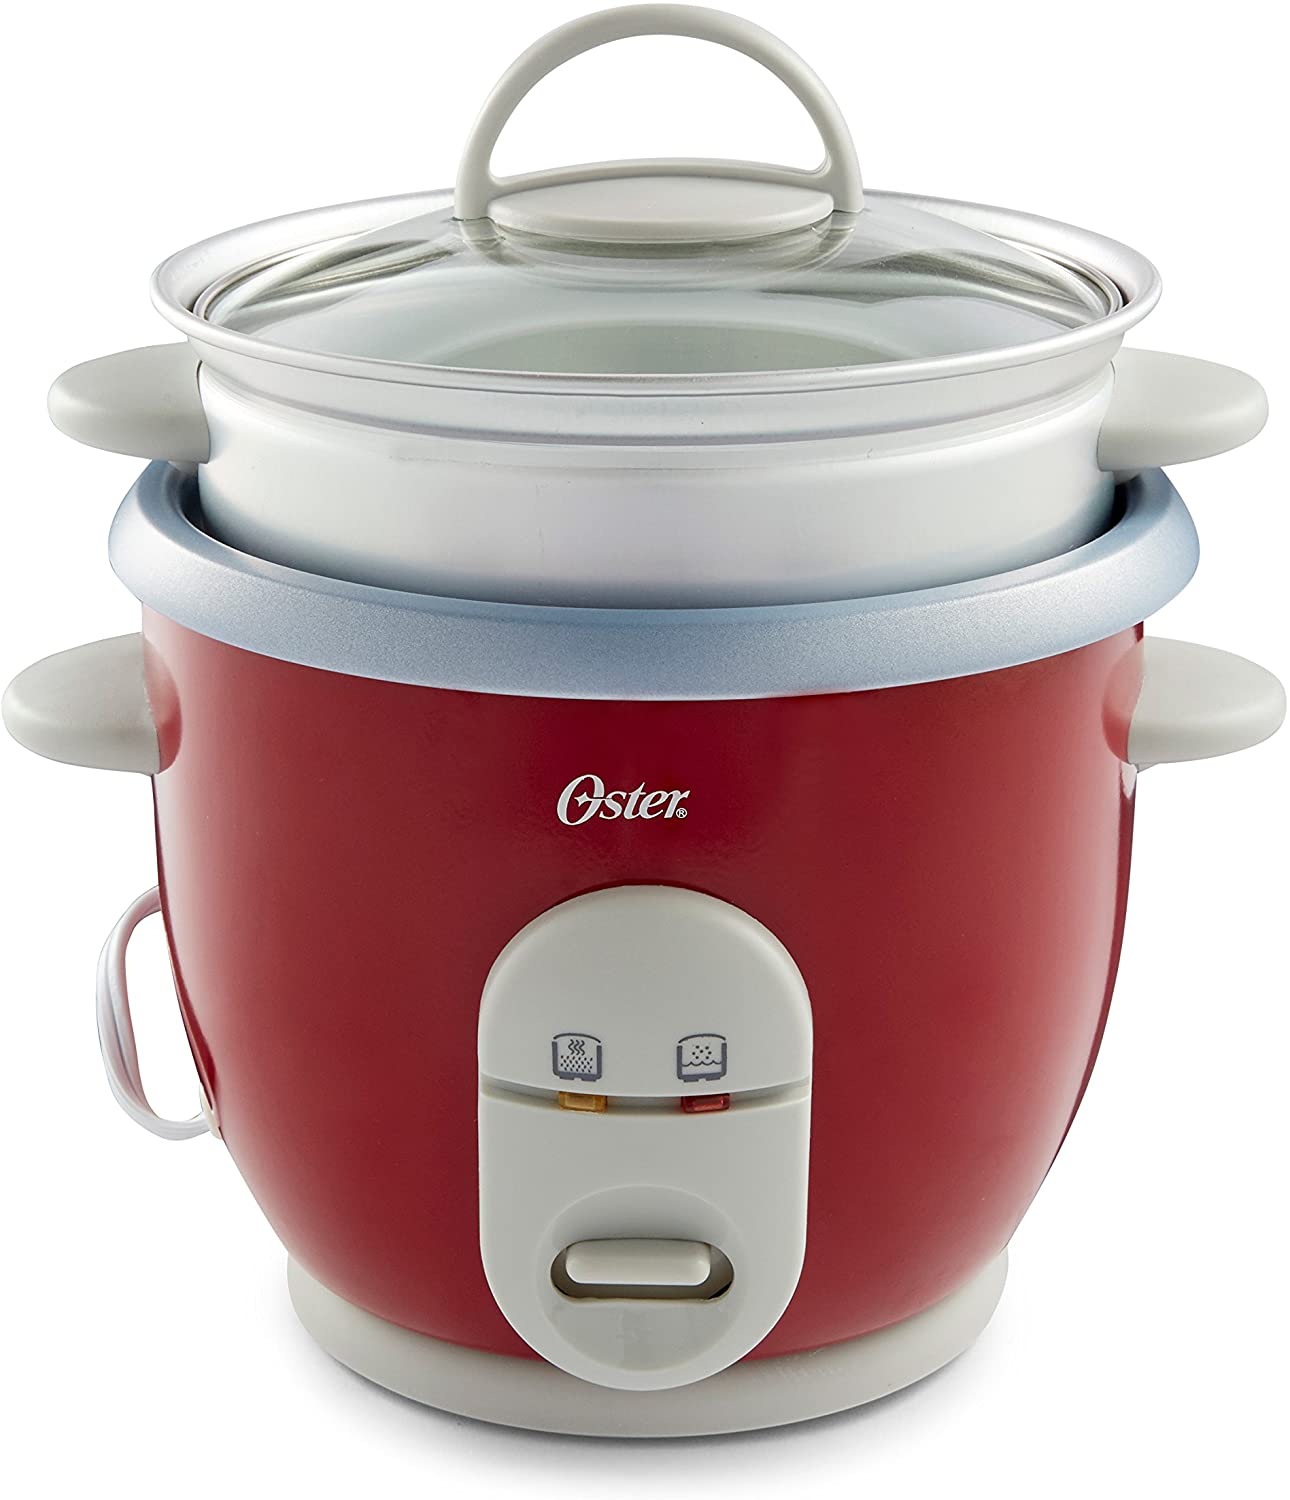 Oster 6-Cup Rice Cooker